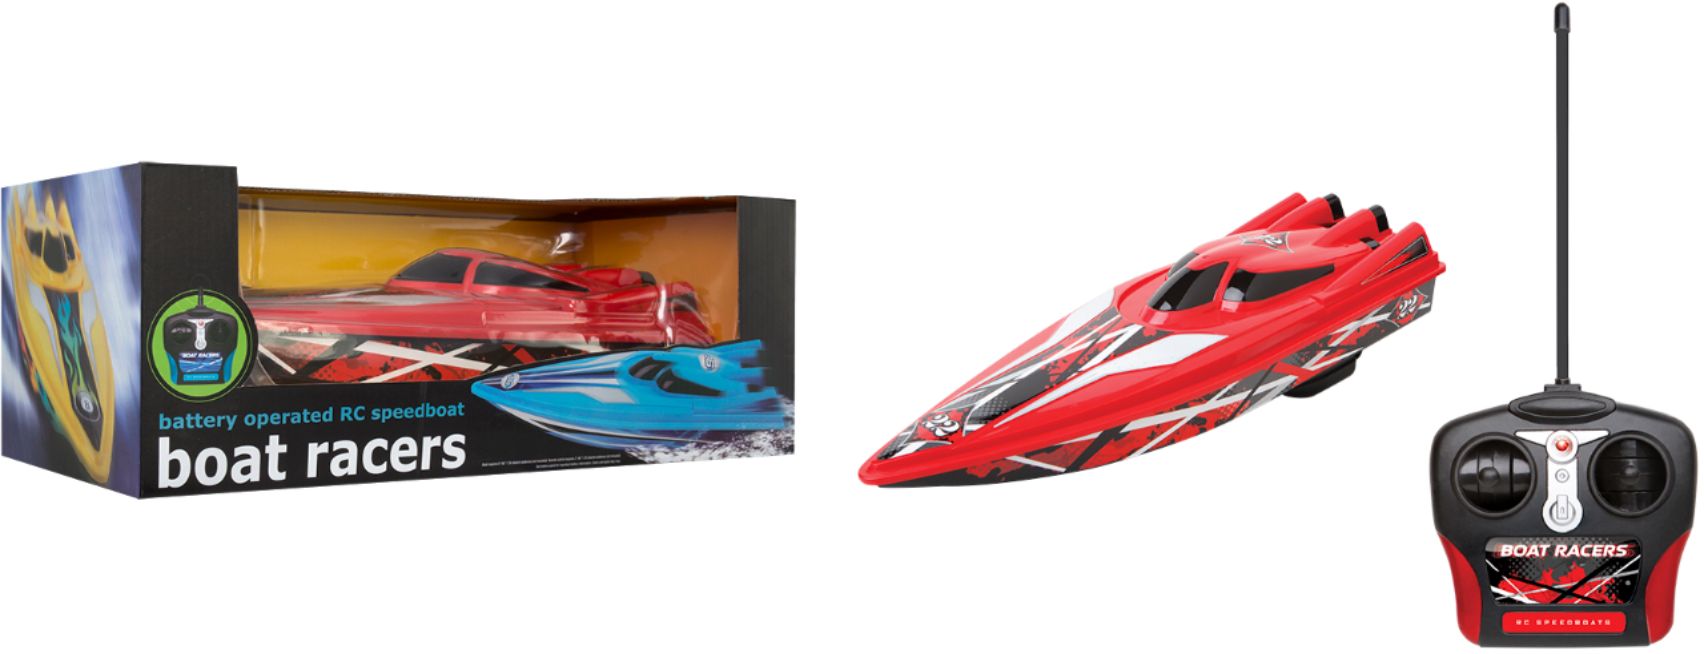 rc boats under $20